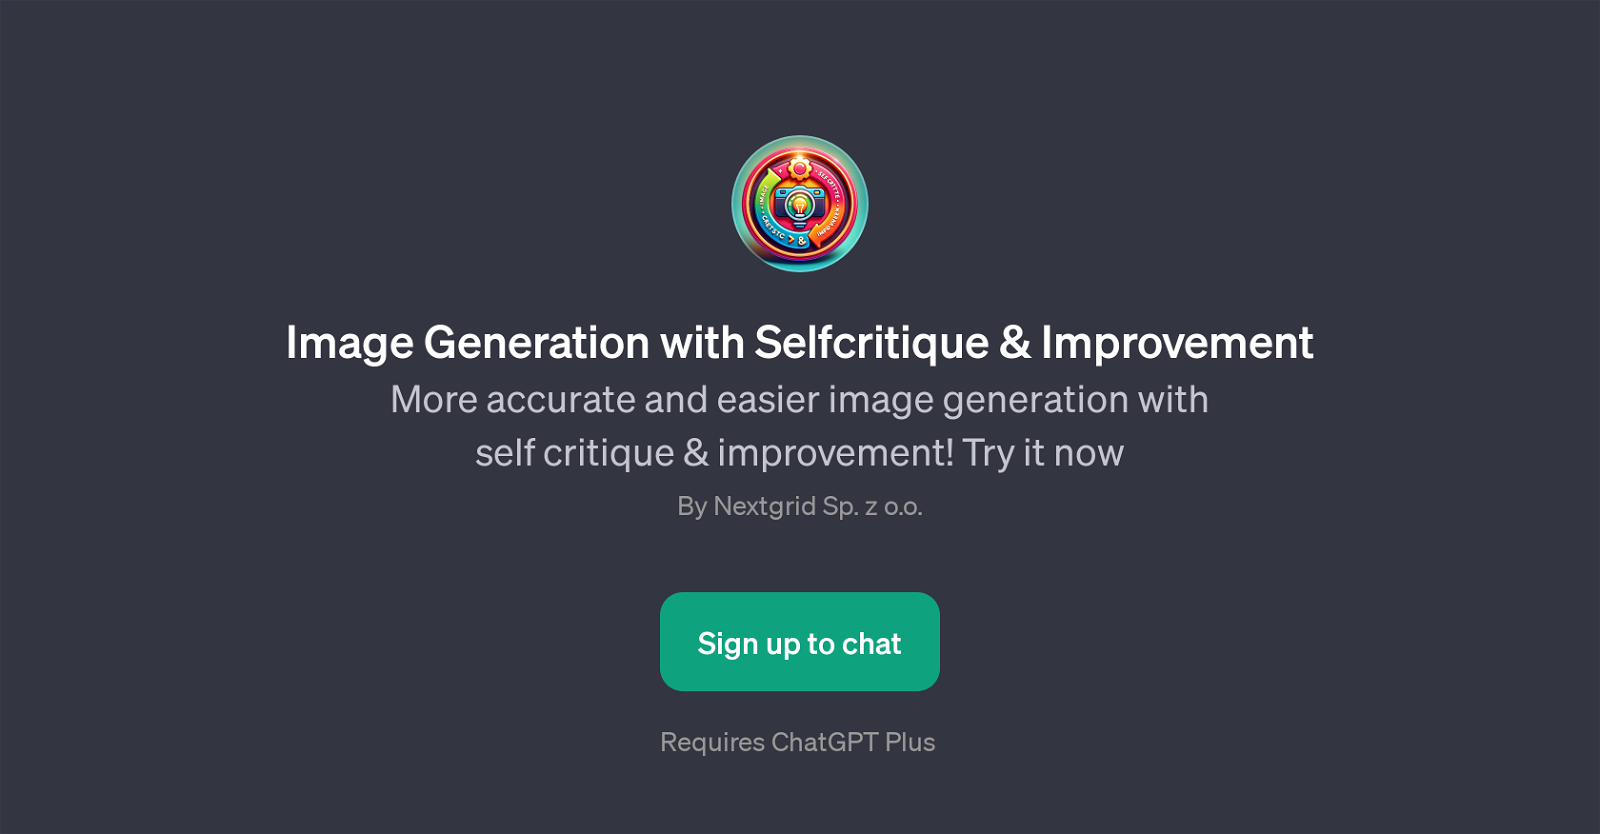 Image Generation with Selfcritique & Improvement website